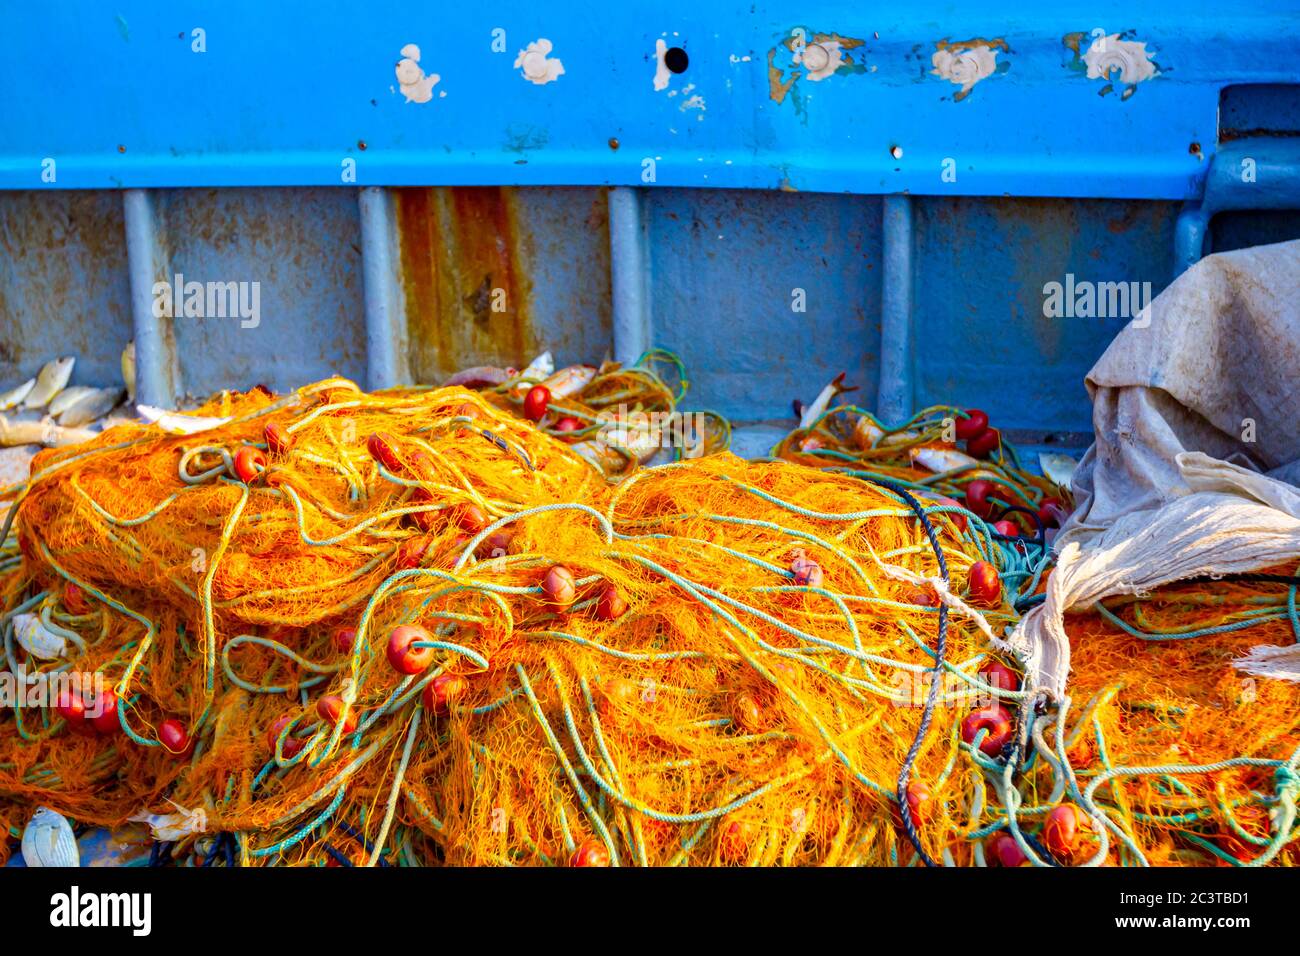 https://c8.alamy.com/comp/2C3TBD1/fisher-in-rubber-trousers-and-boot-siting-in-his-boat-and-pile-up-fishing-net-for-angling-at-open-sea-2C3TBD1.jpg